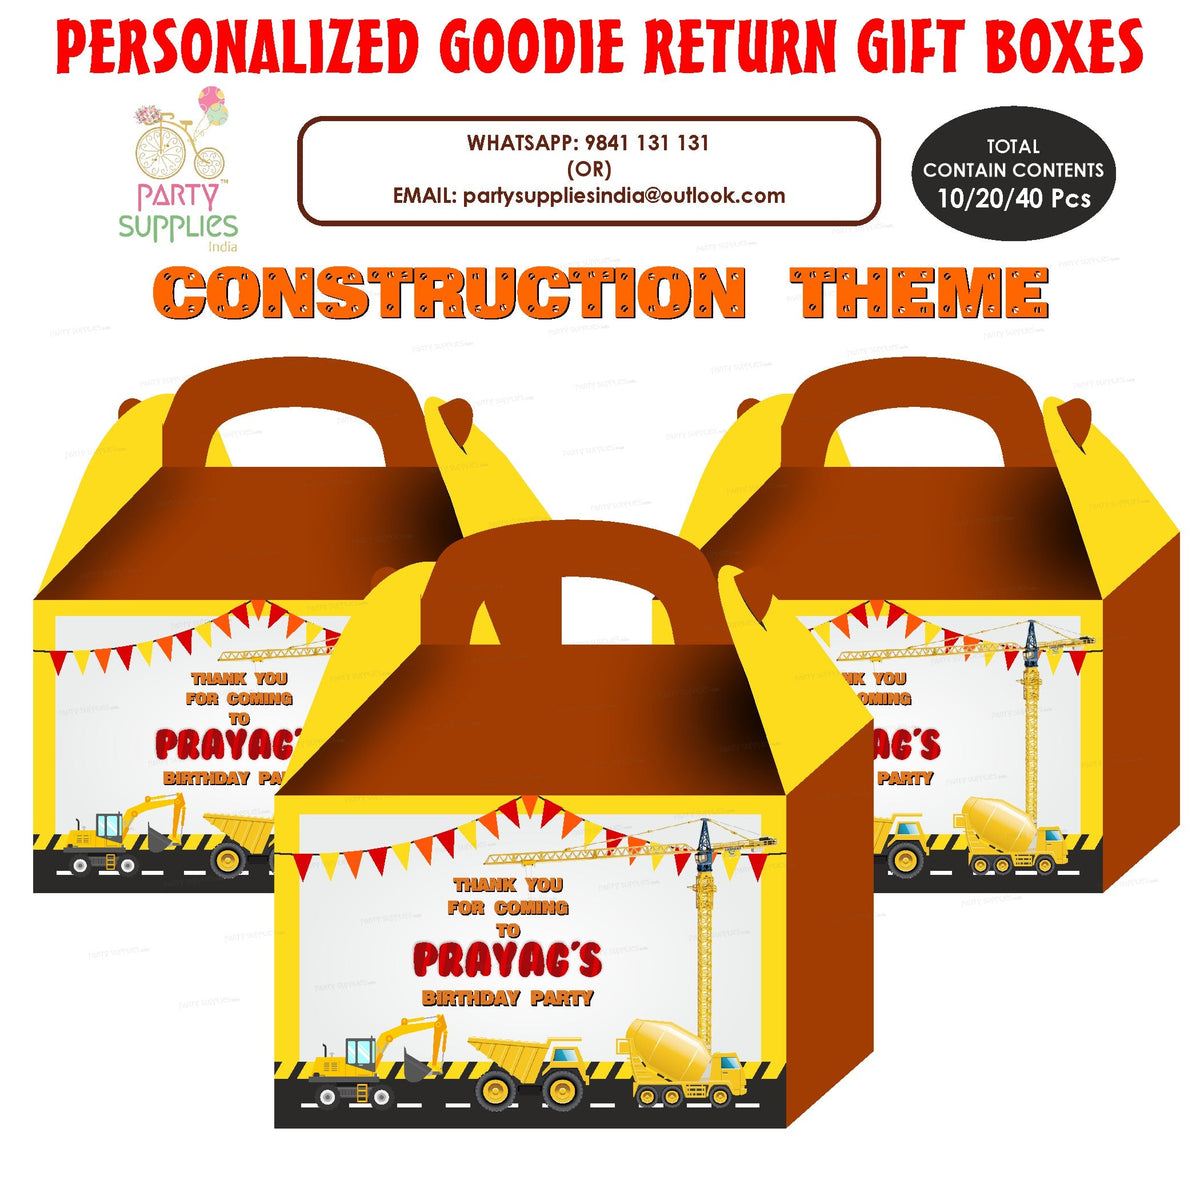 PSI Construction theme Goodie Return Gift Boxes